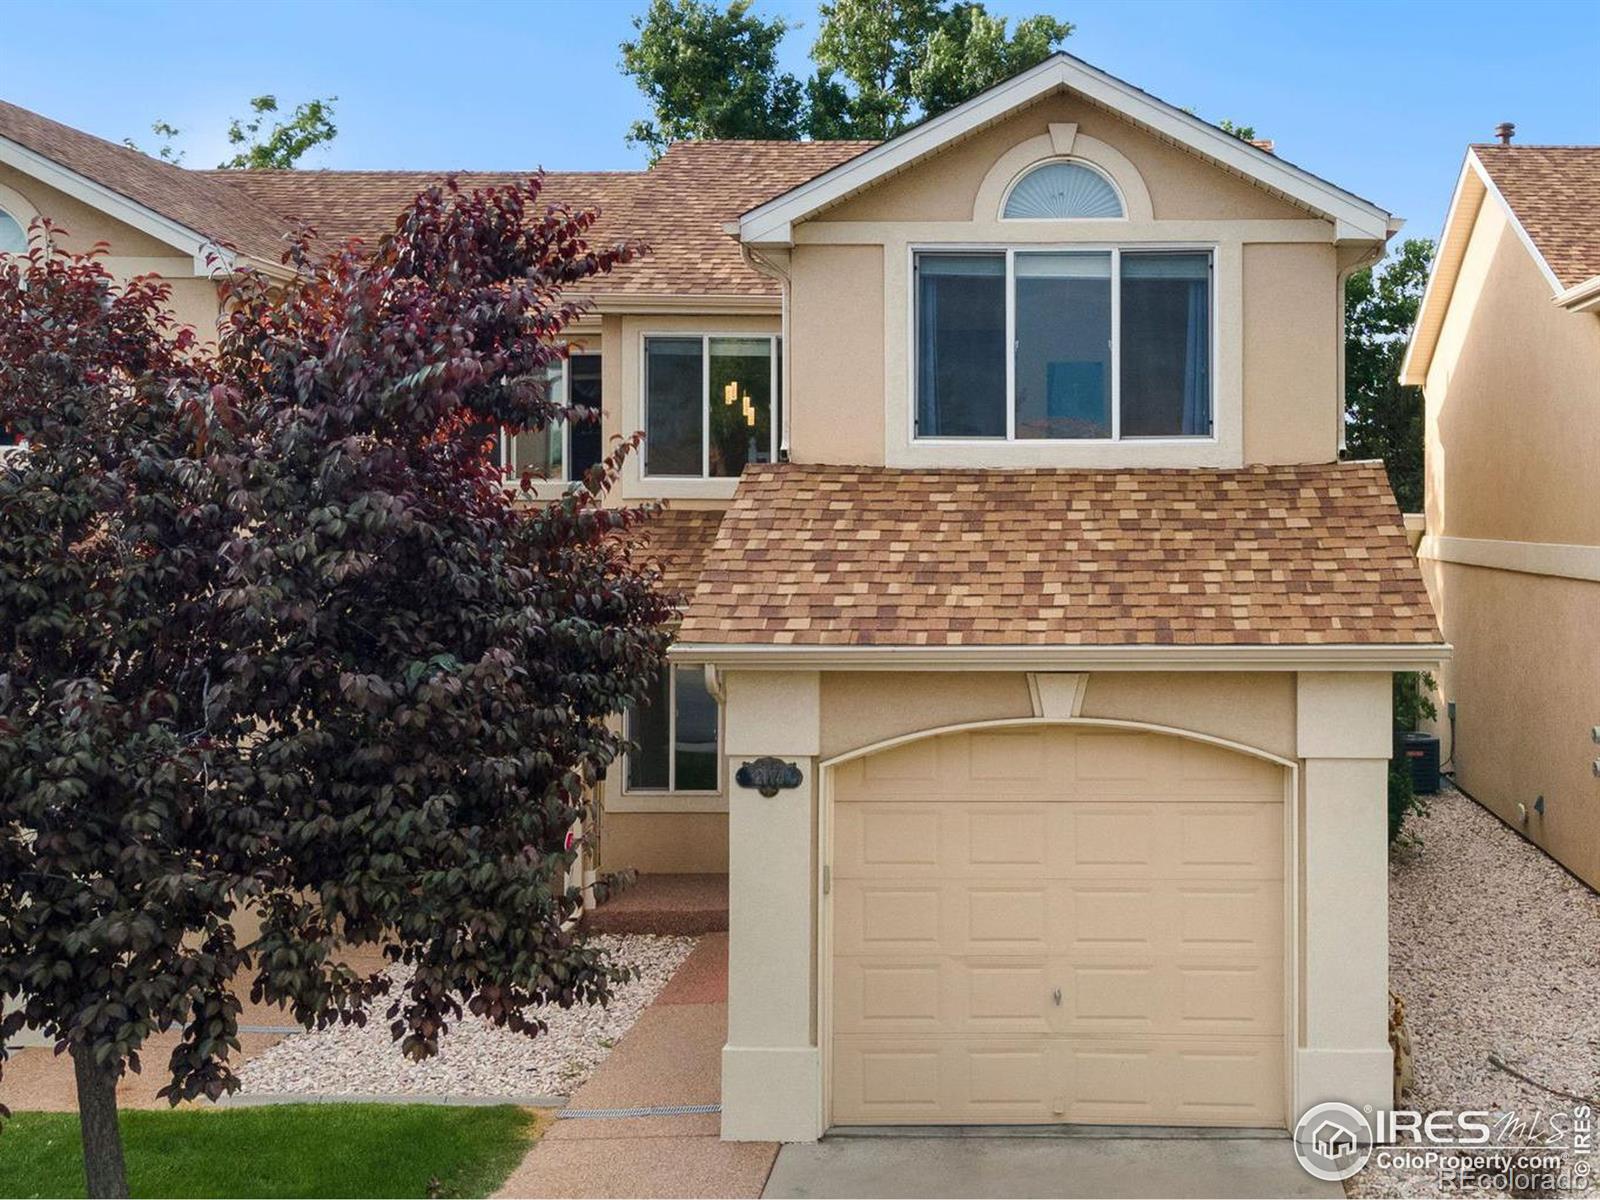 2174  Water Blossom Lane, fort collins MLS: 456789991276 Beds: 3 Baths: 3 Price: $415,000